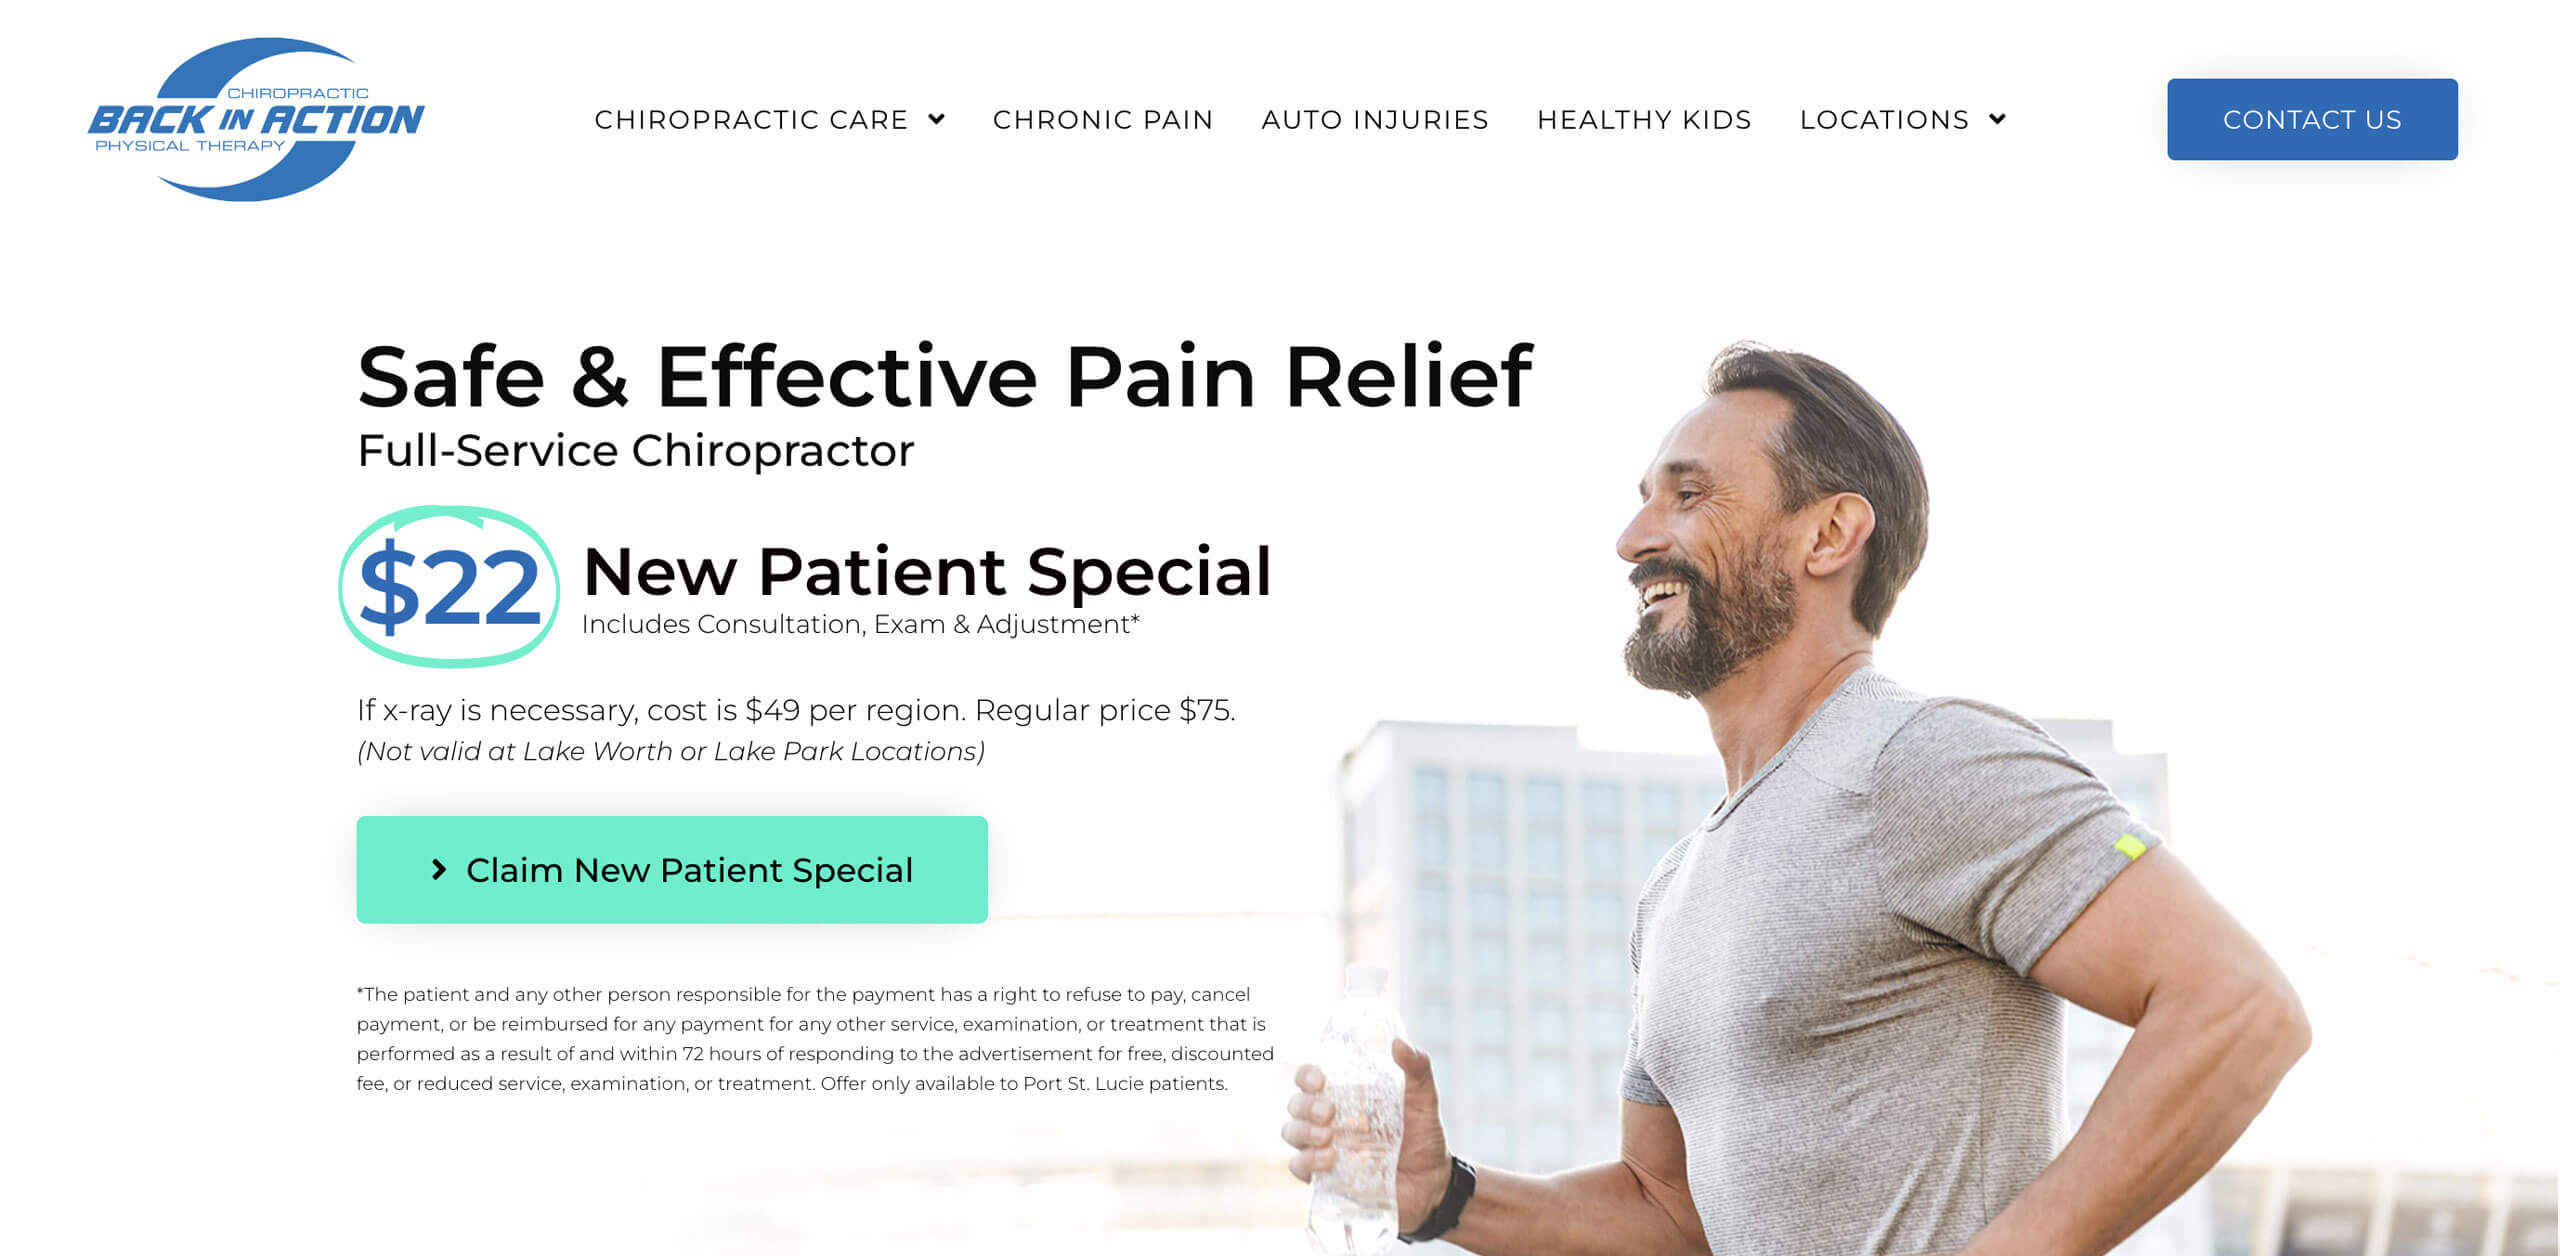 Port St. Lucie Chiropractor Acquires New Patients for $31